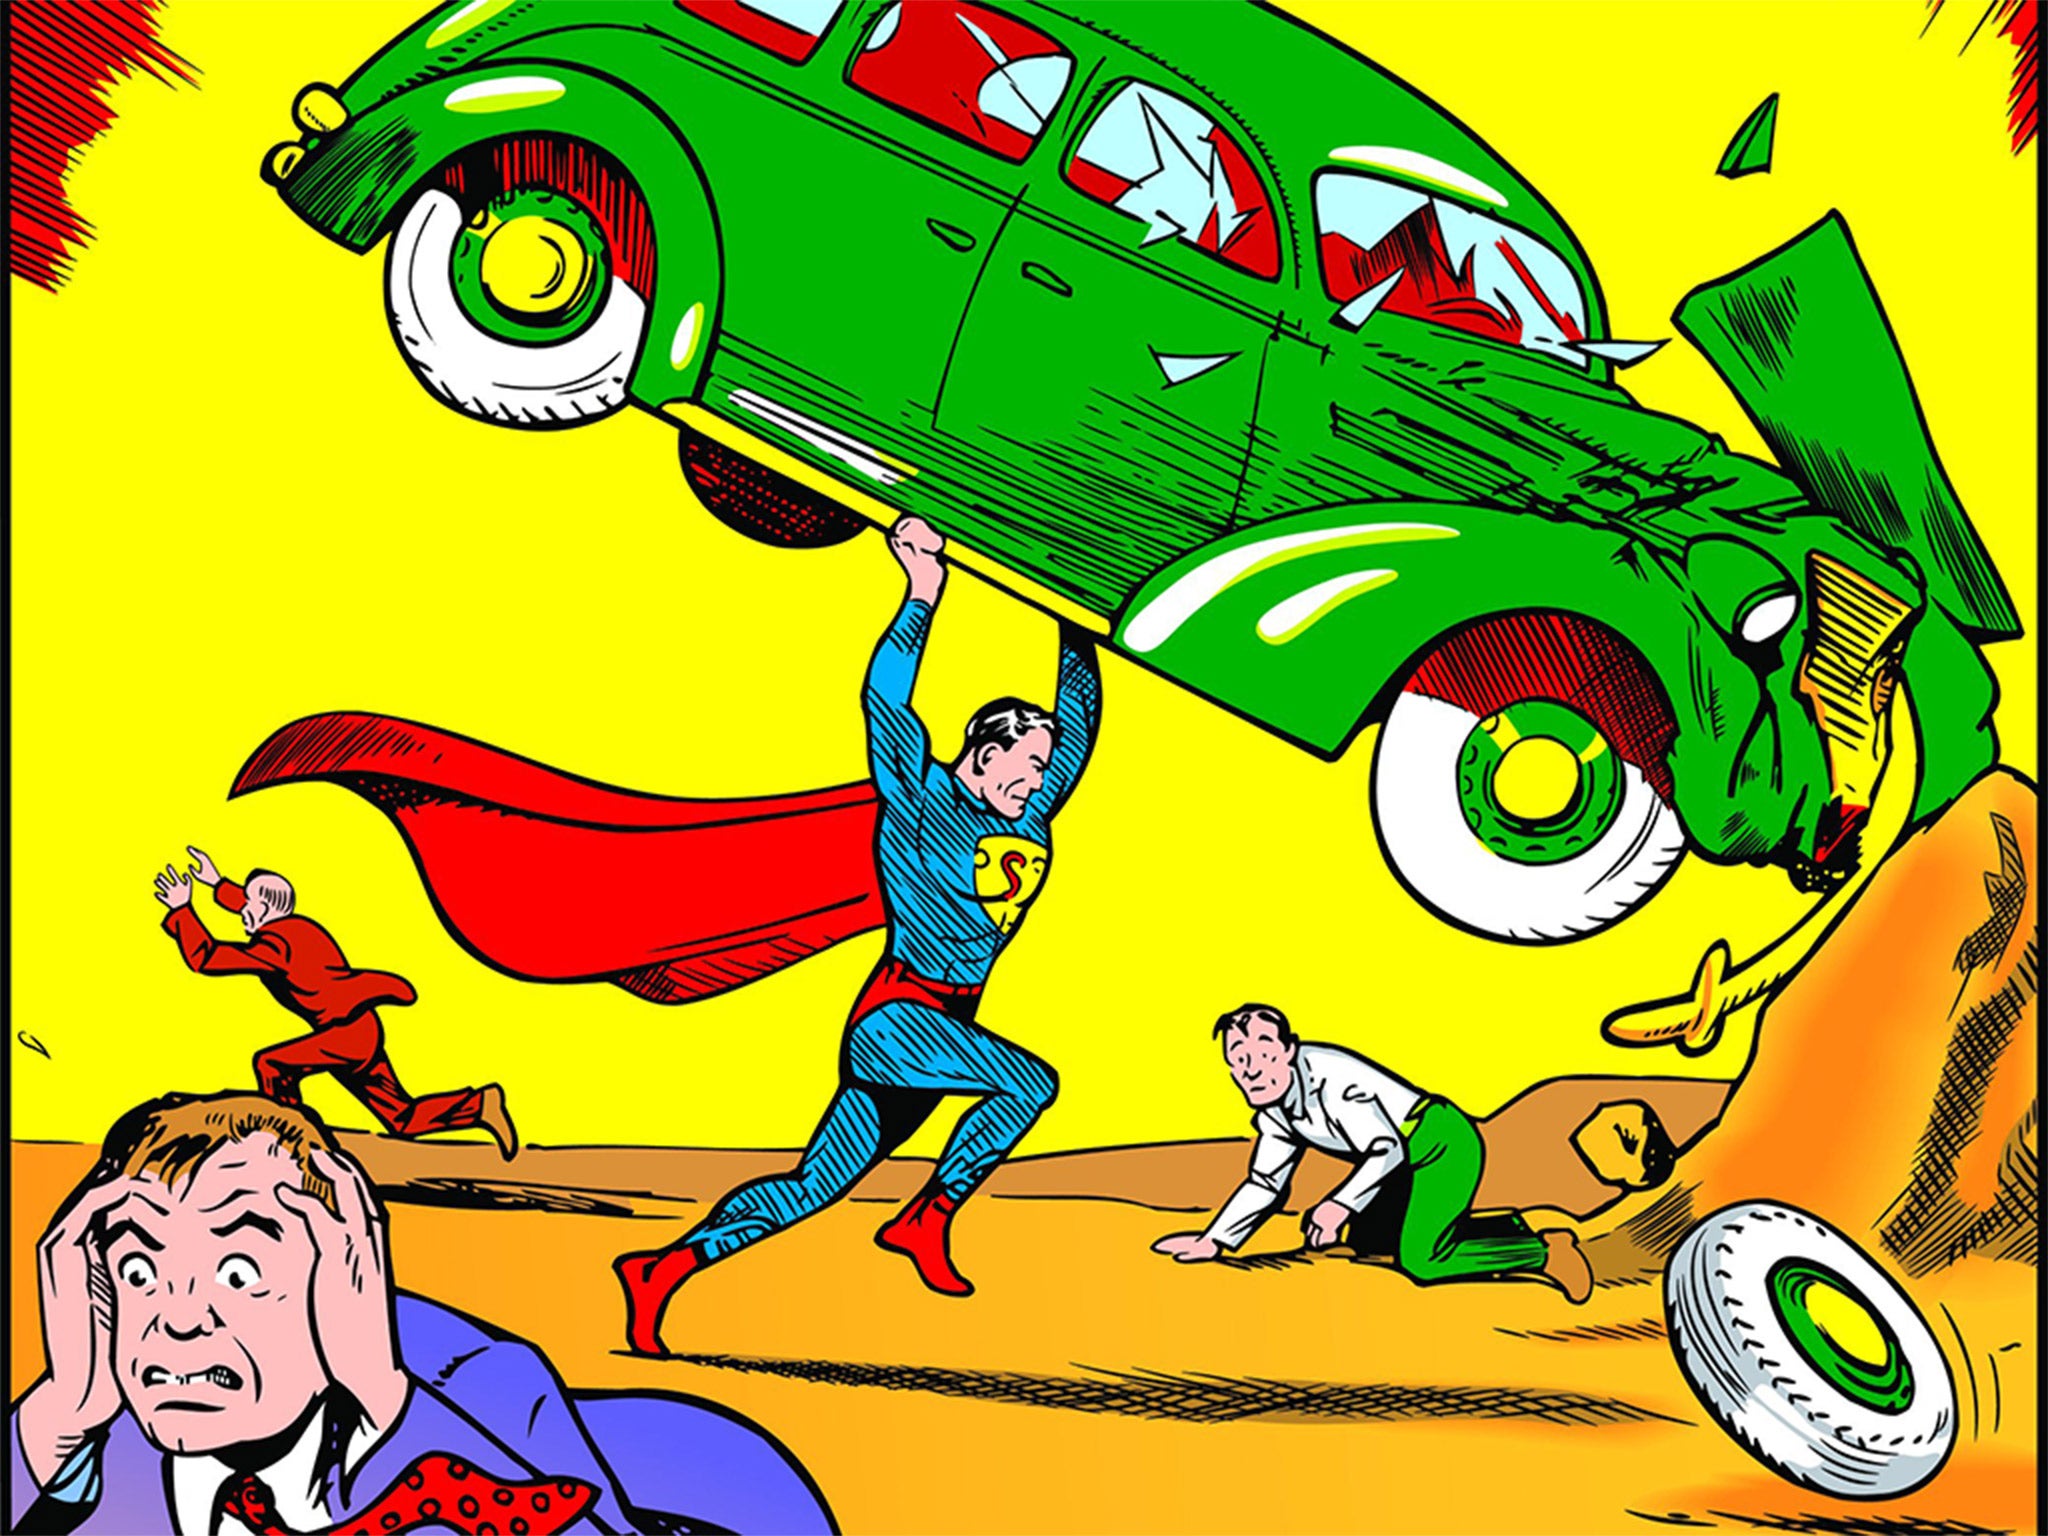 Nicholas Cage's copy of Action Comics No.1 sold for $2,161,000 at an online auction